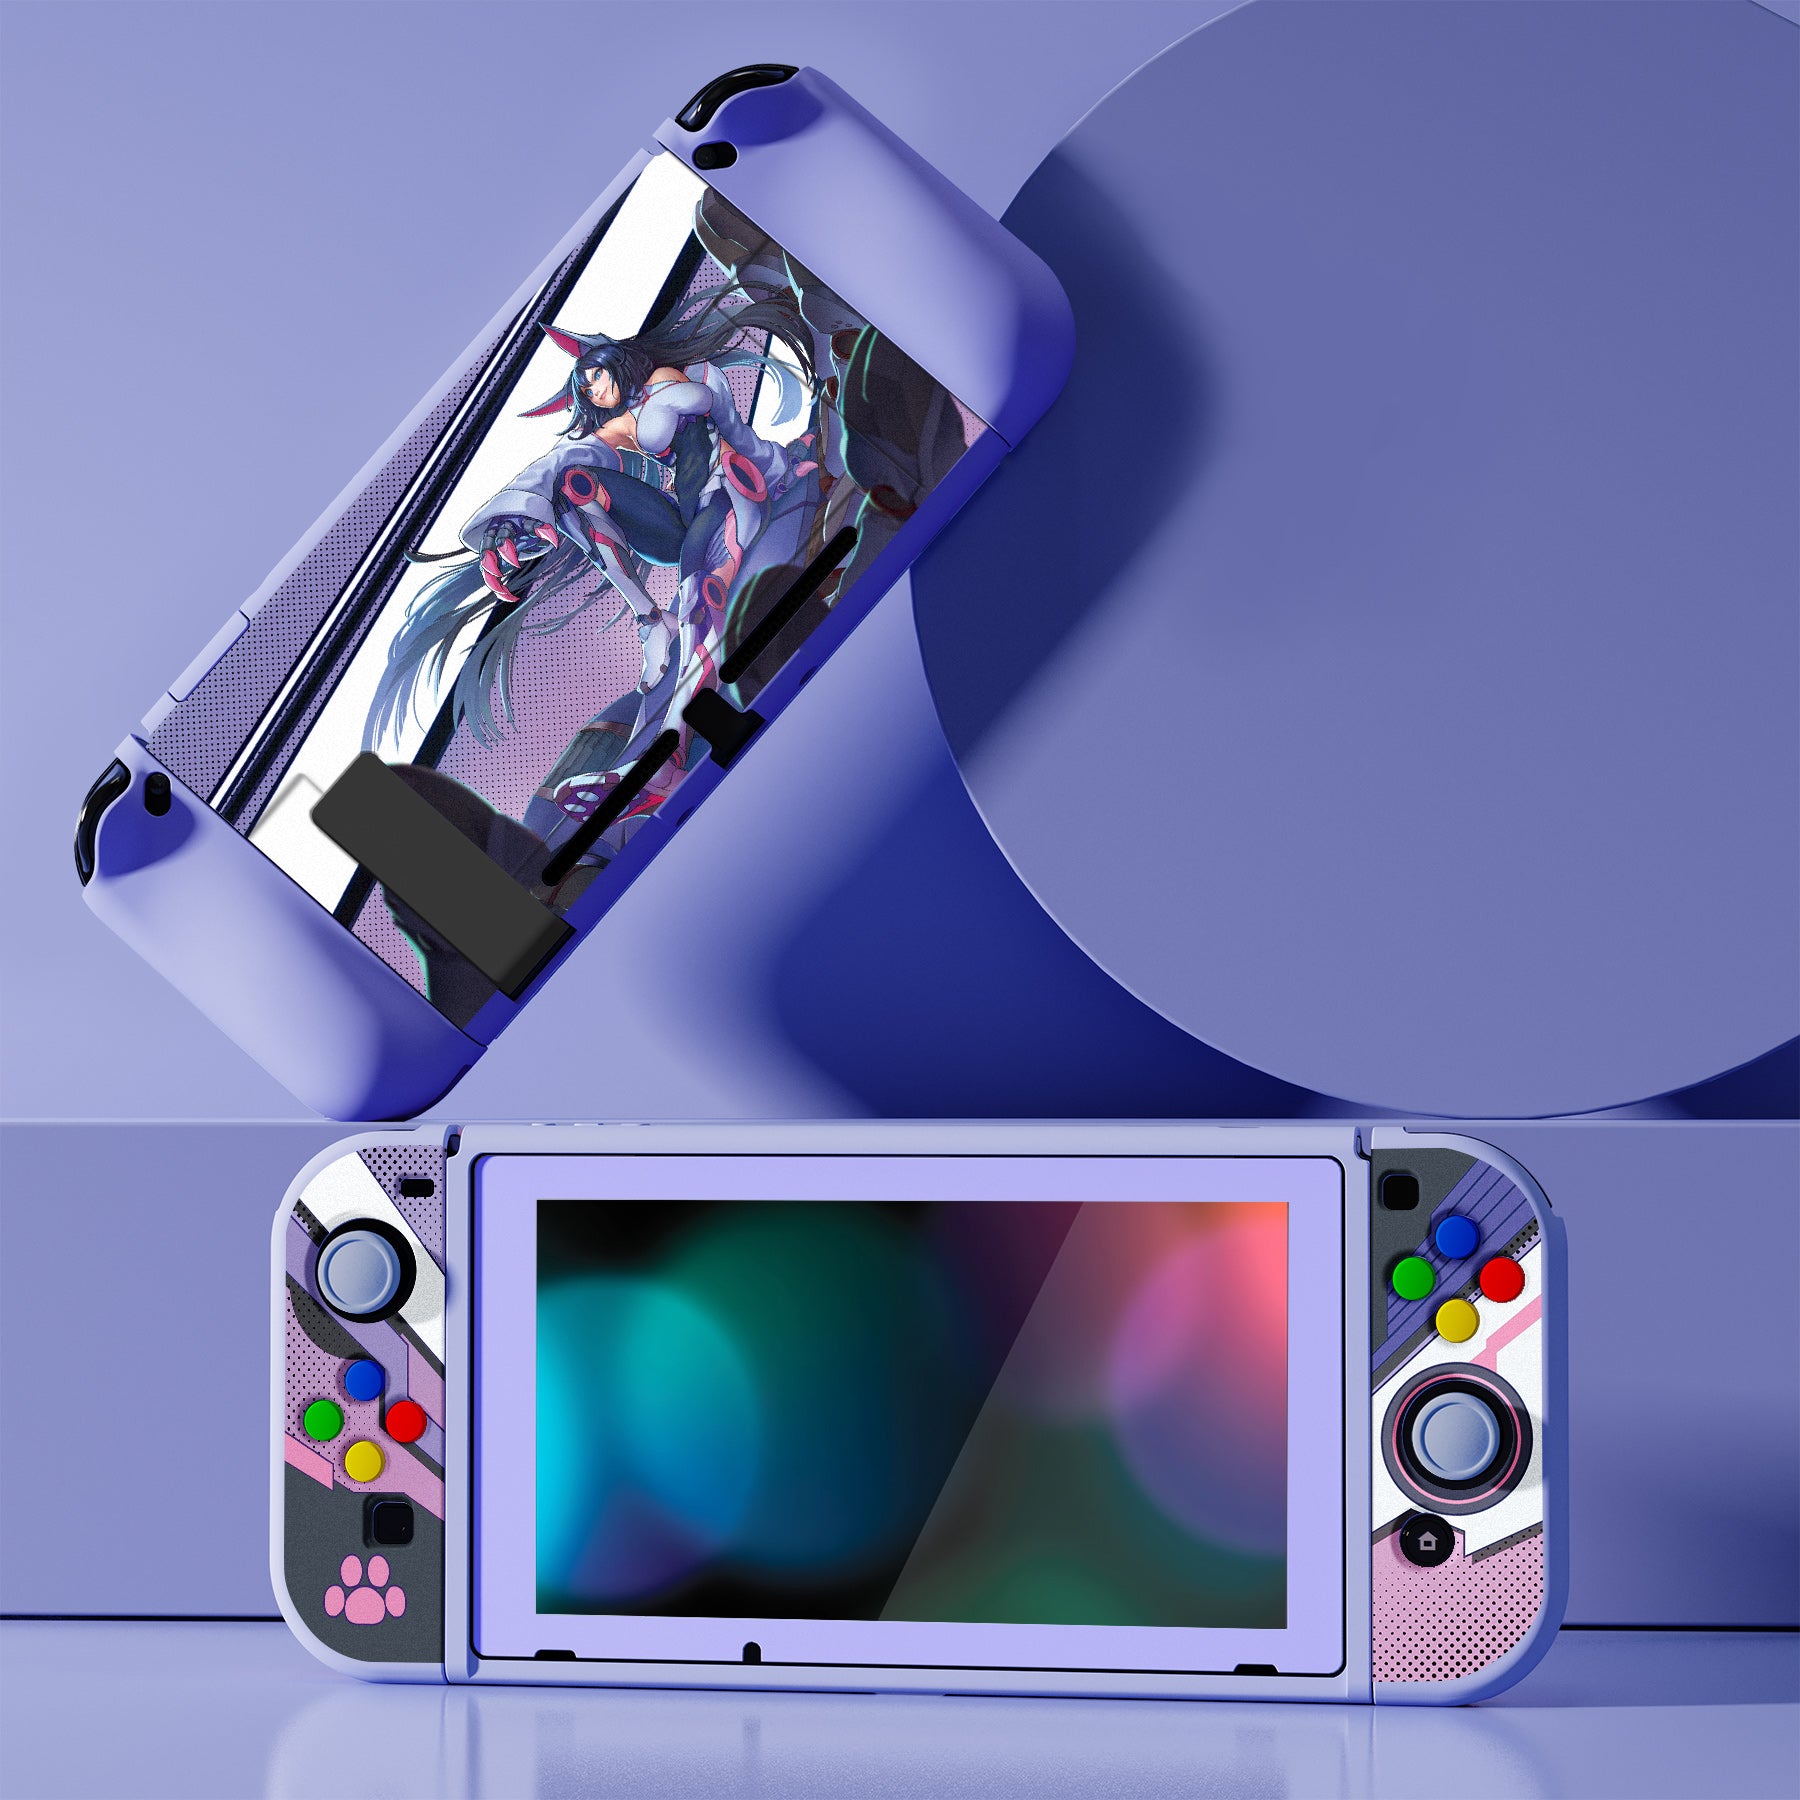 PlayVital ZealProtect Soft Protective Case for Nintendo Switch, Flexible Cover for Switch with Tempered Glass Screen Protector & Thumb Grips & ABXY Direction Button Caps - Neko Mecha - RNSYV6036 playvital